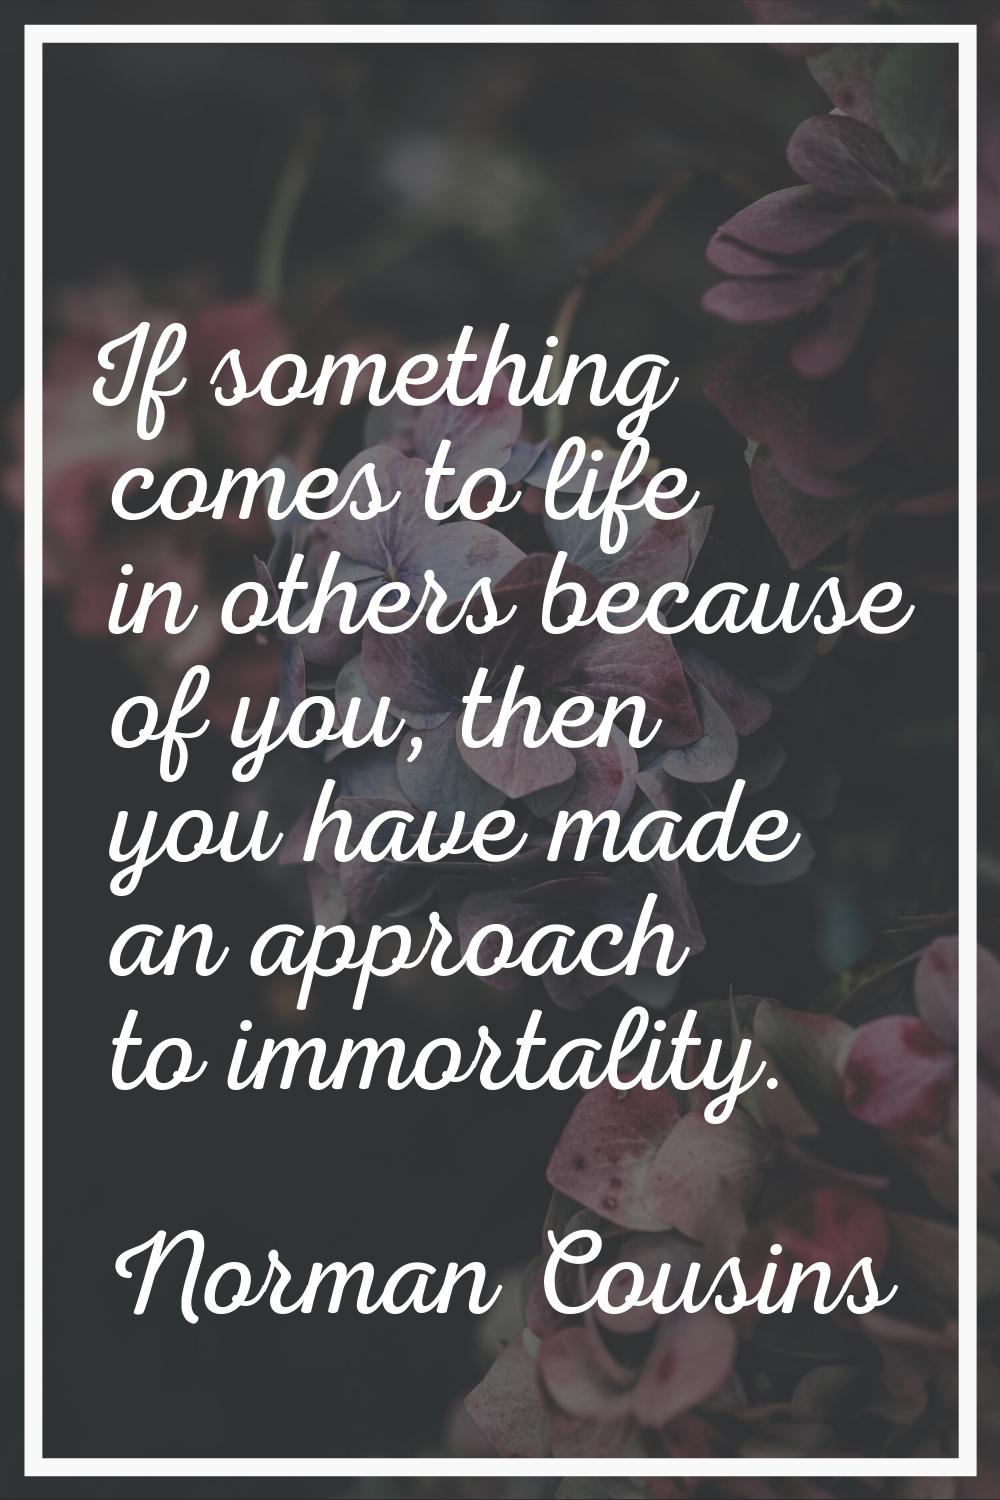 If something comes to life in others because of you, then you have made an approach to immortality.